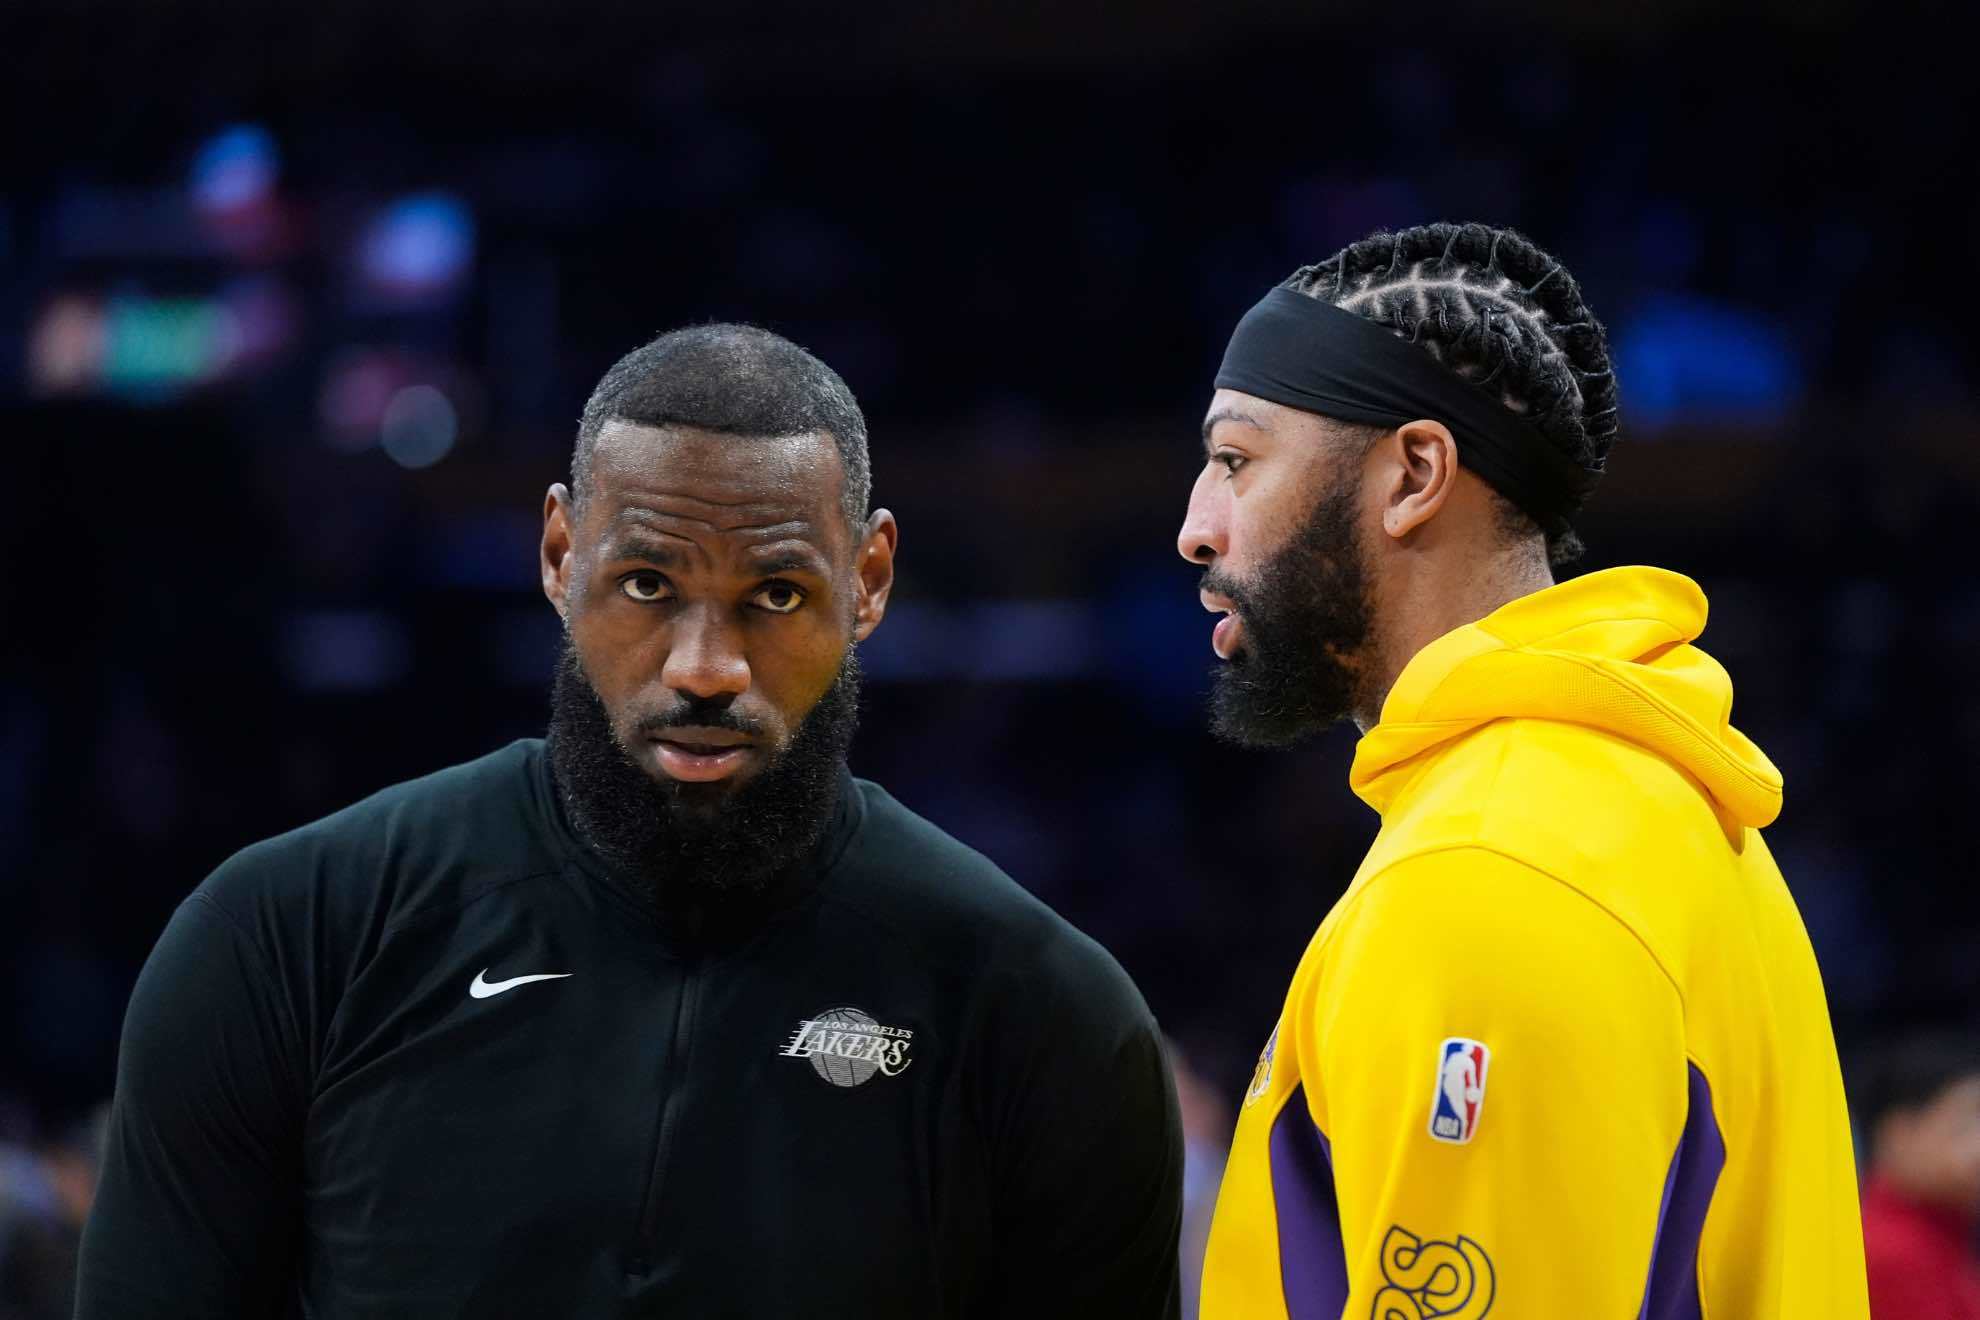 LeBron James got frustrated with Anthony Davis during Lakers Game 2 loss